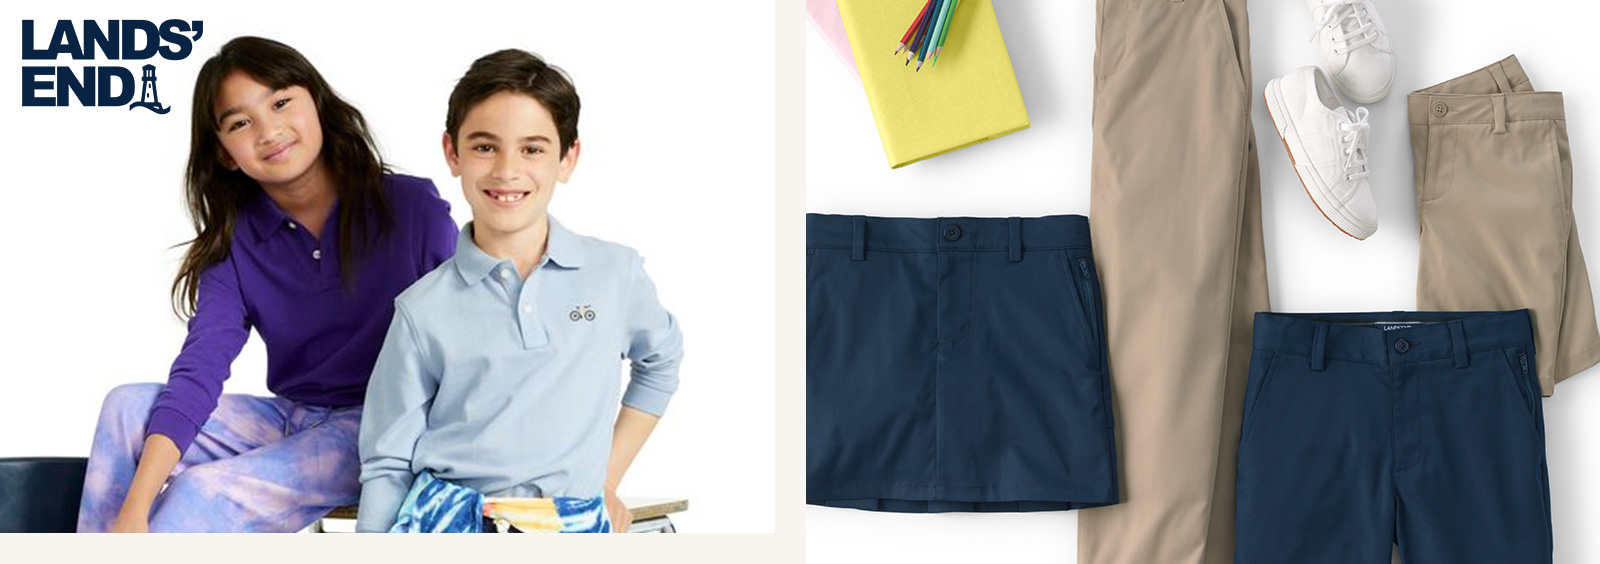 Tips for First-Time School Uniform Shoppers